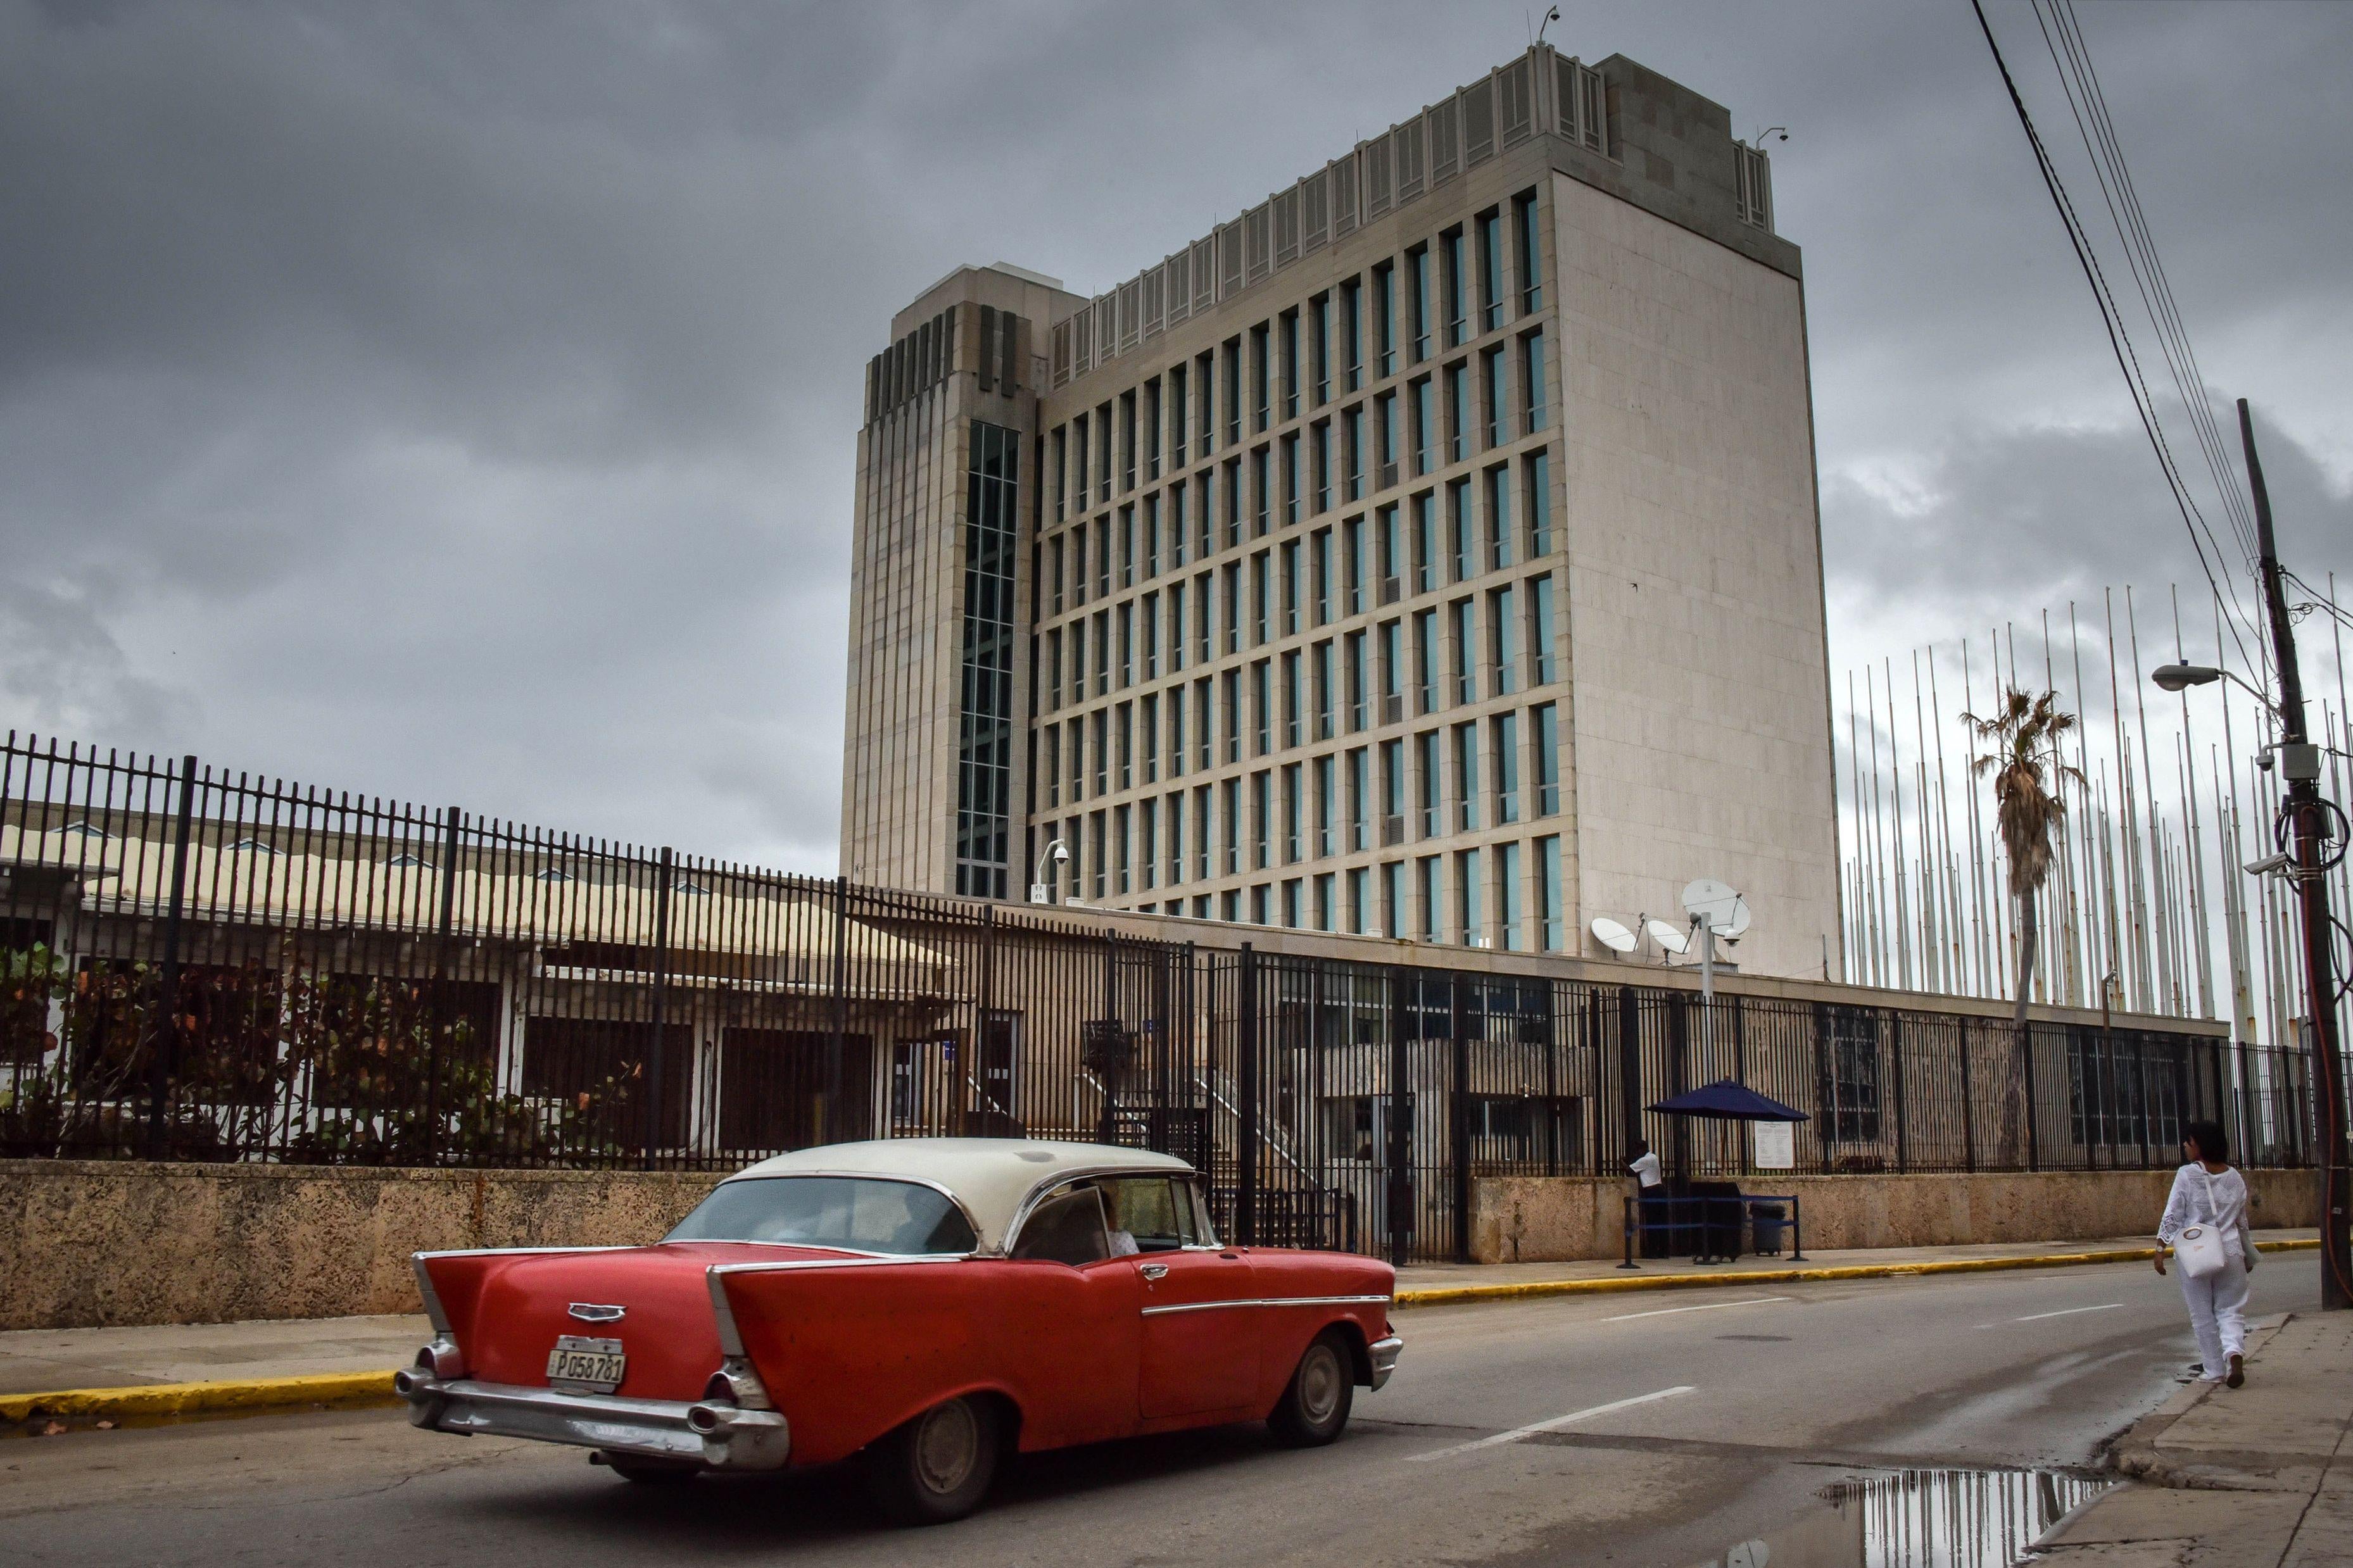 The U.S. embassy in Havana with a classic vintage car out front.